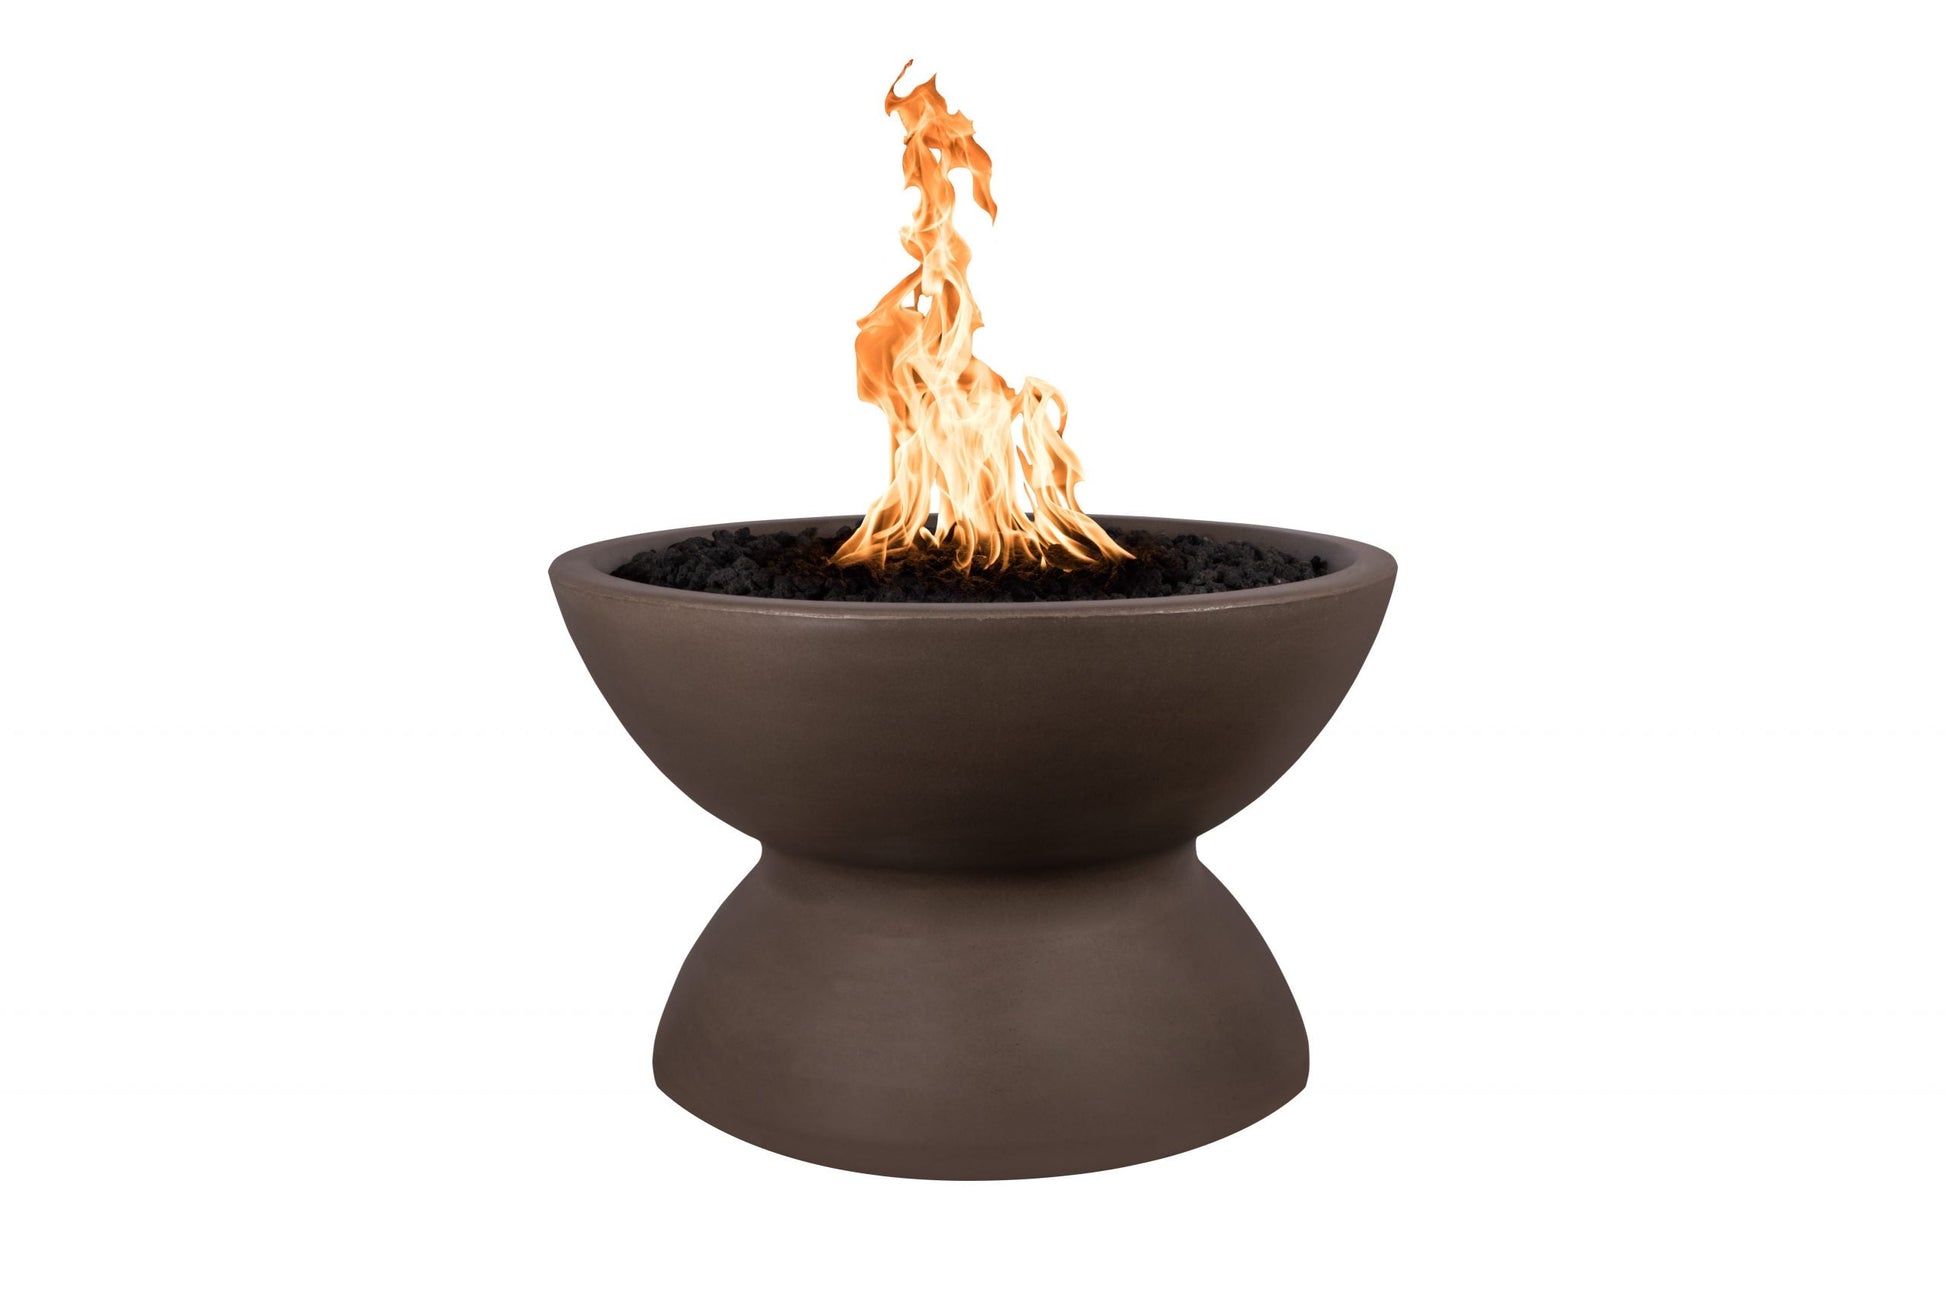 The Outdoor Plus Round Copa 33" Chestnut GFRC Concrete Liquid Propane Fire Pit with 110V Electronic Ignition